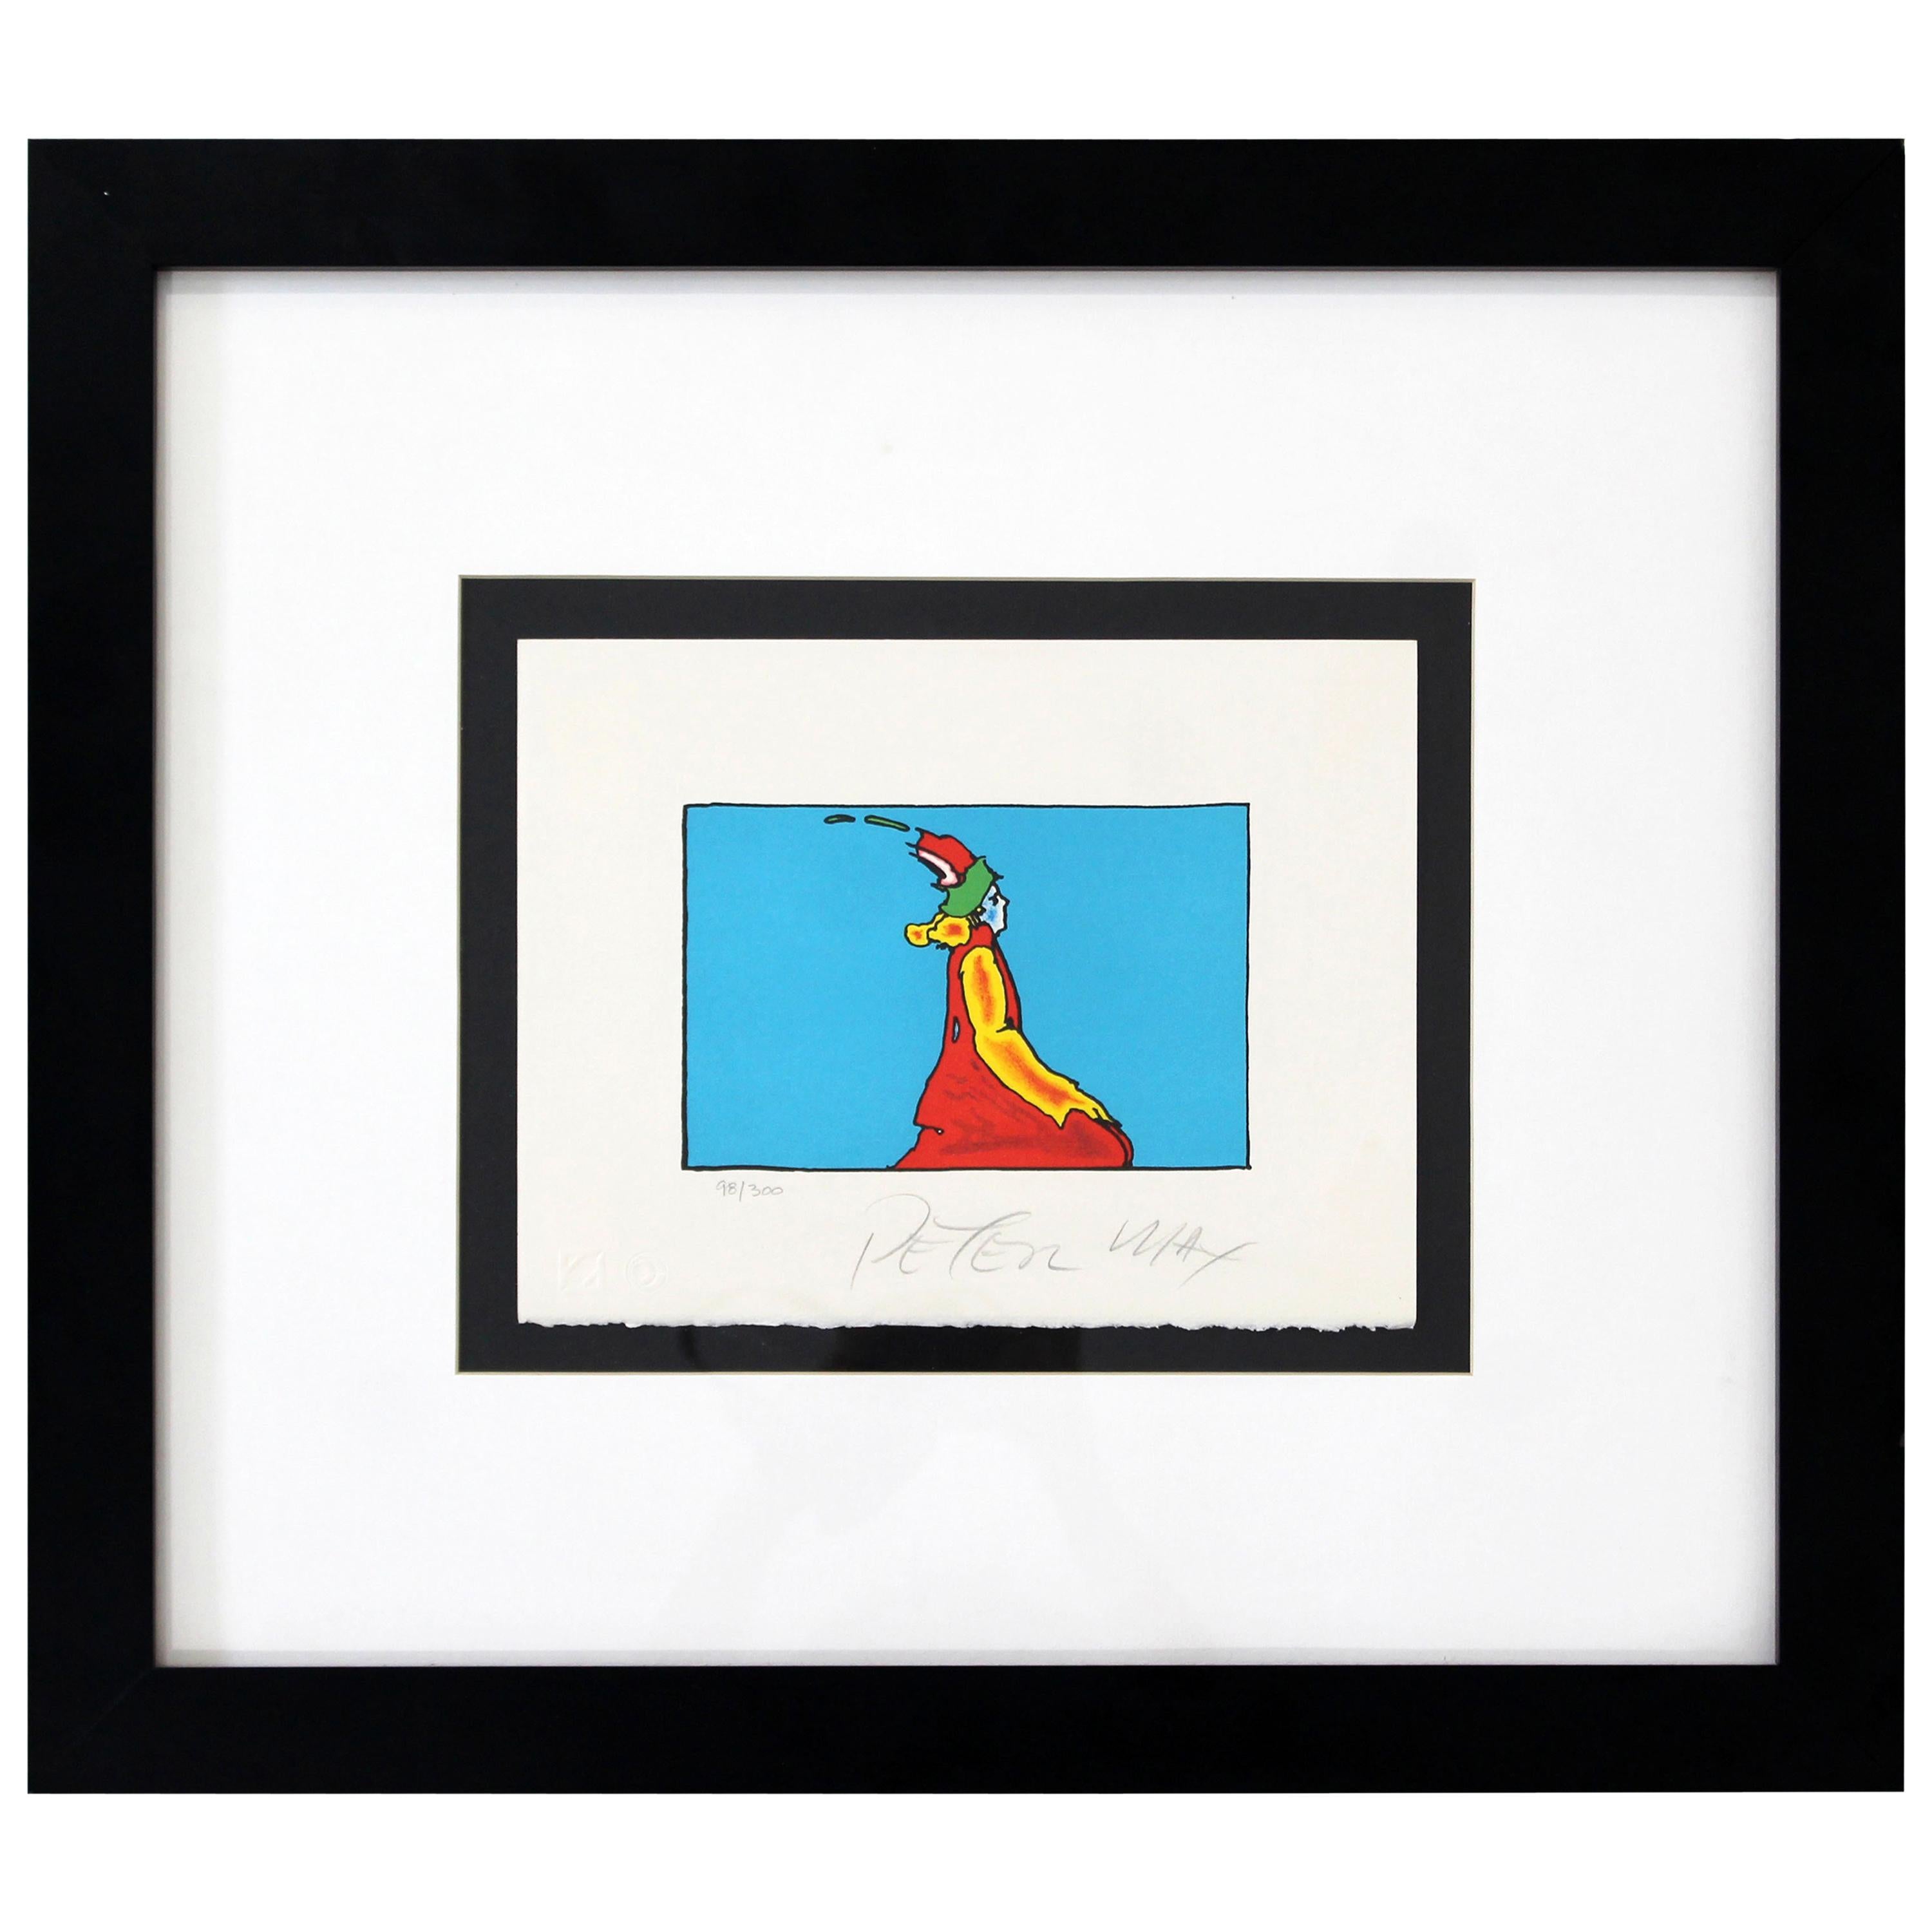 Mid-Century Modern Framed Peter Max Lithograph Signed 98/300 "Looking Right"